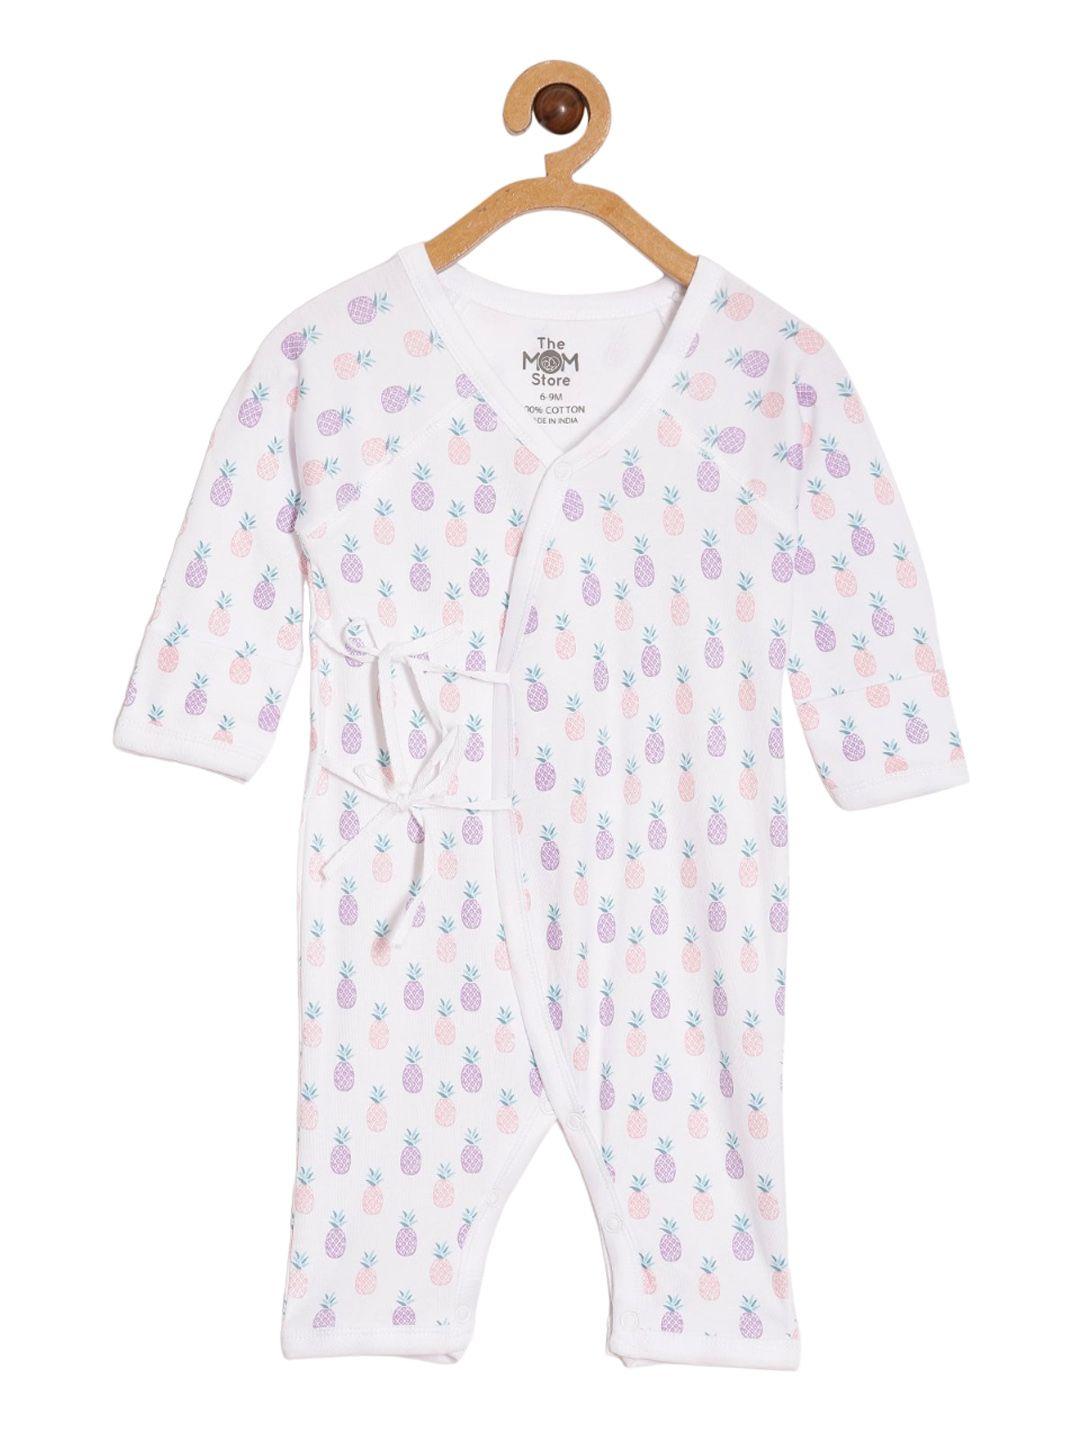 the-mom-store-infants-i-pine-printed-cotton-romper